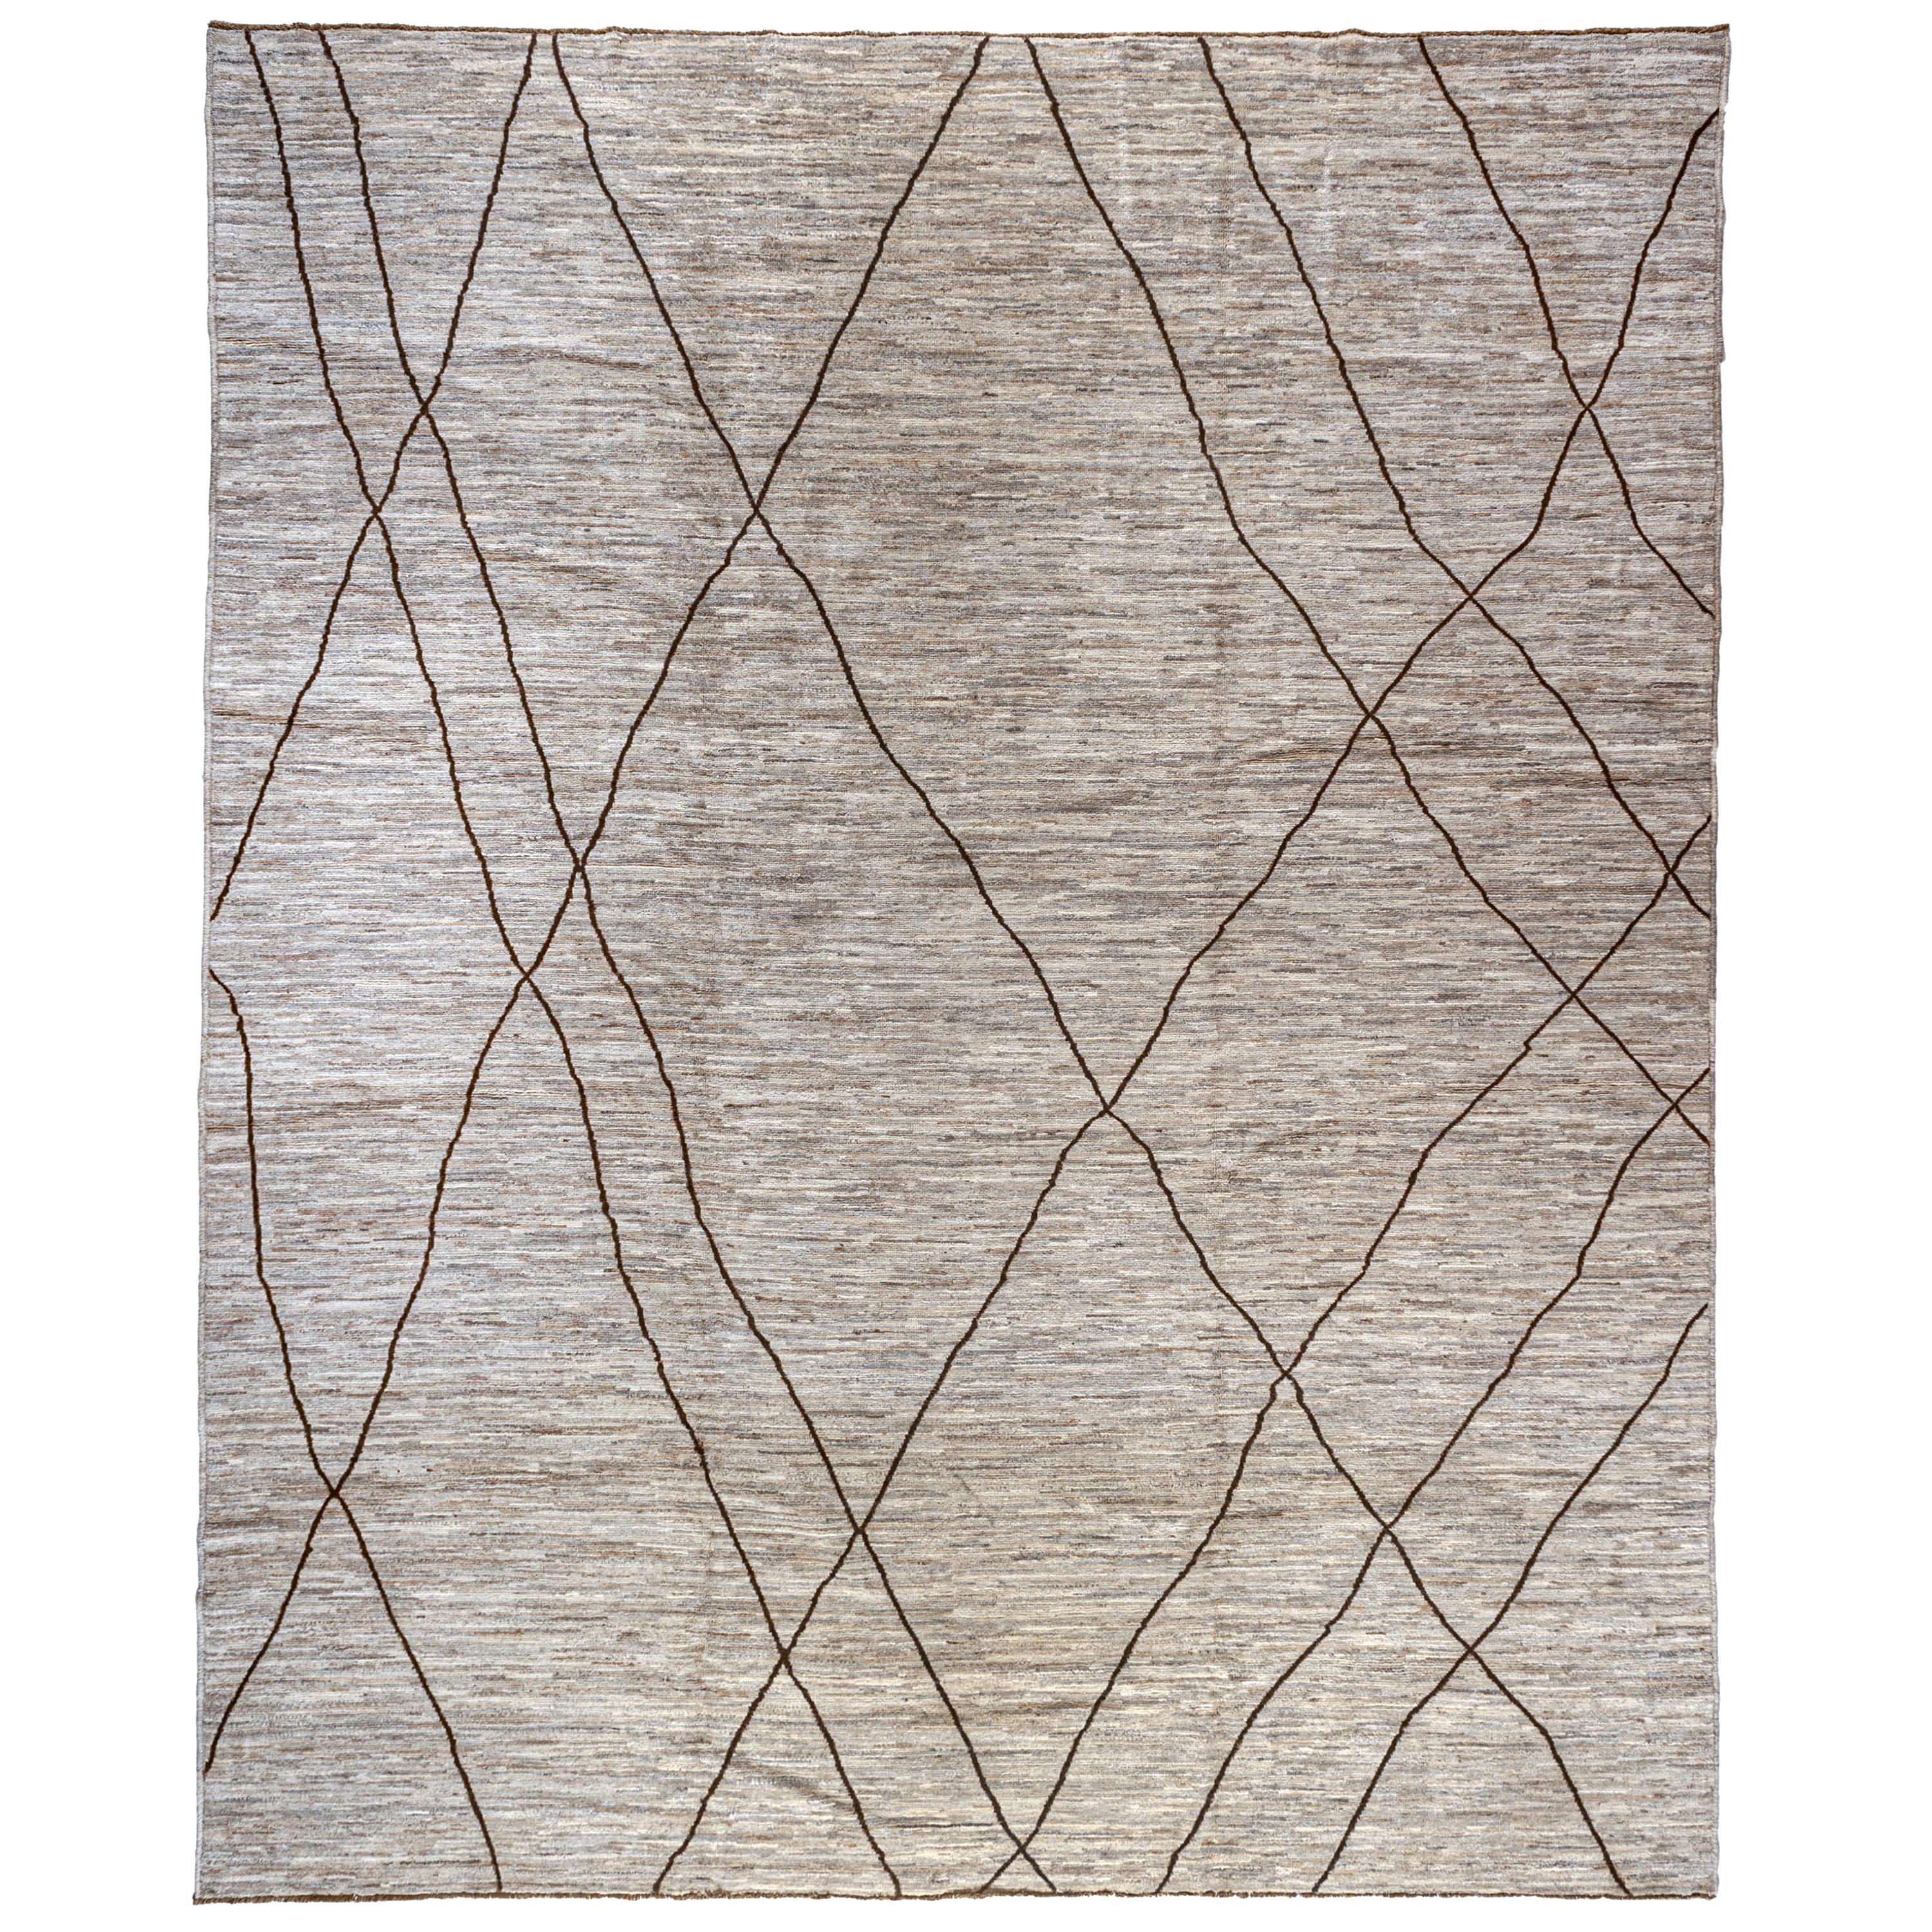 Taupe Moroccan Inspired Rug For Sale